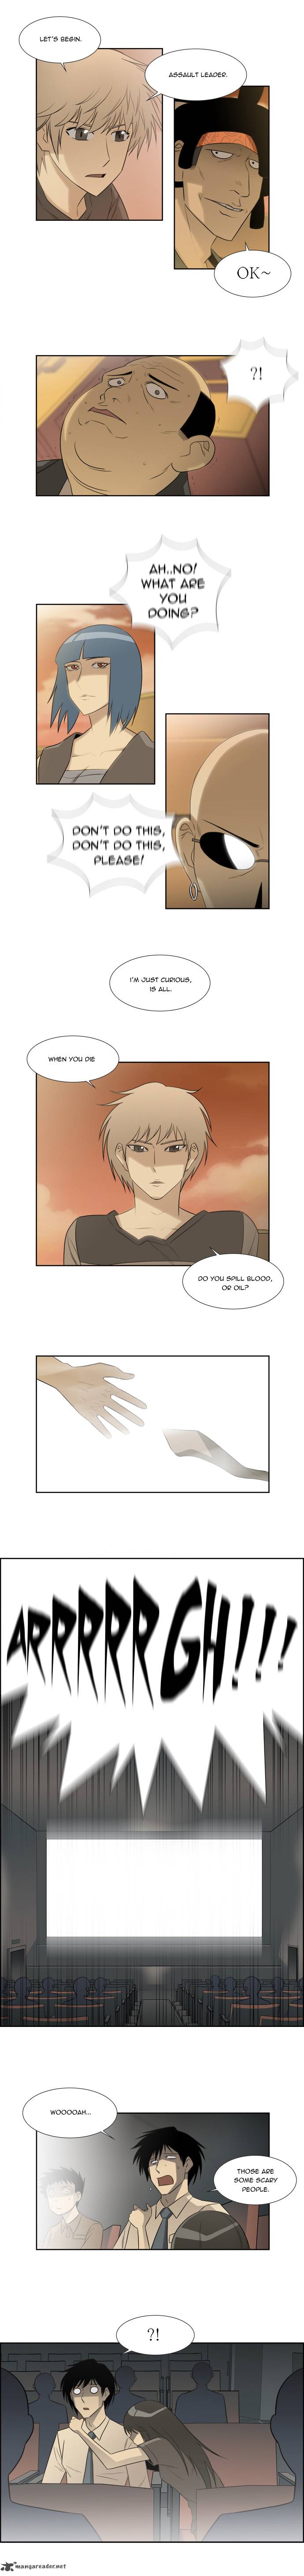 Melo Holic Chapter 16 Page 2